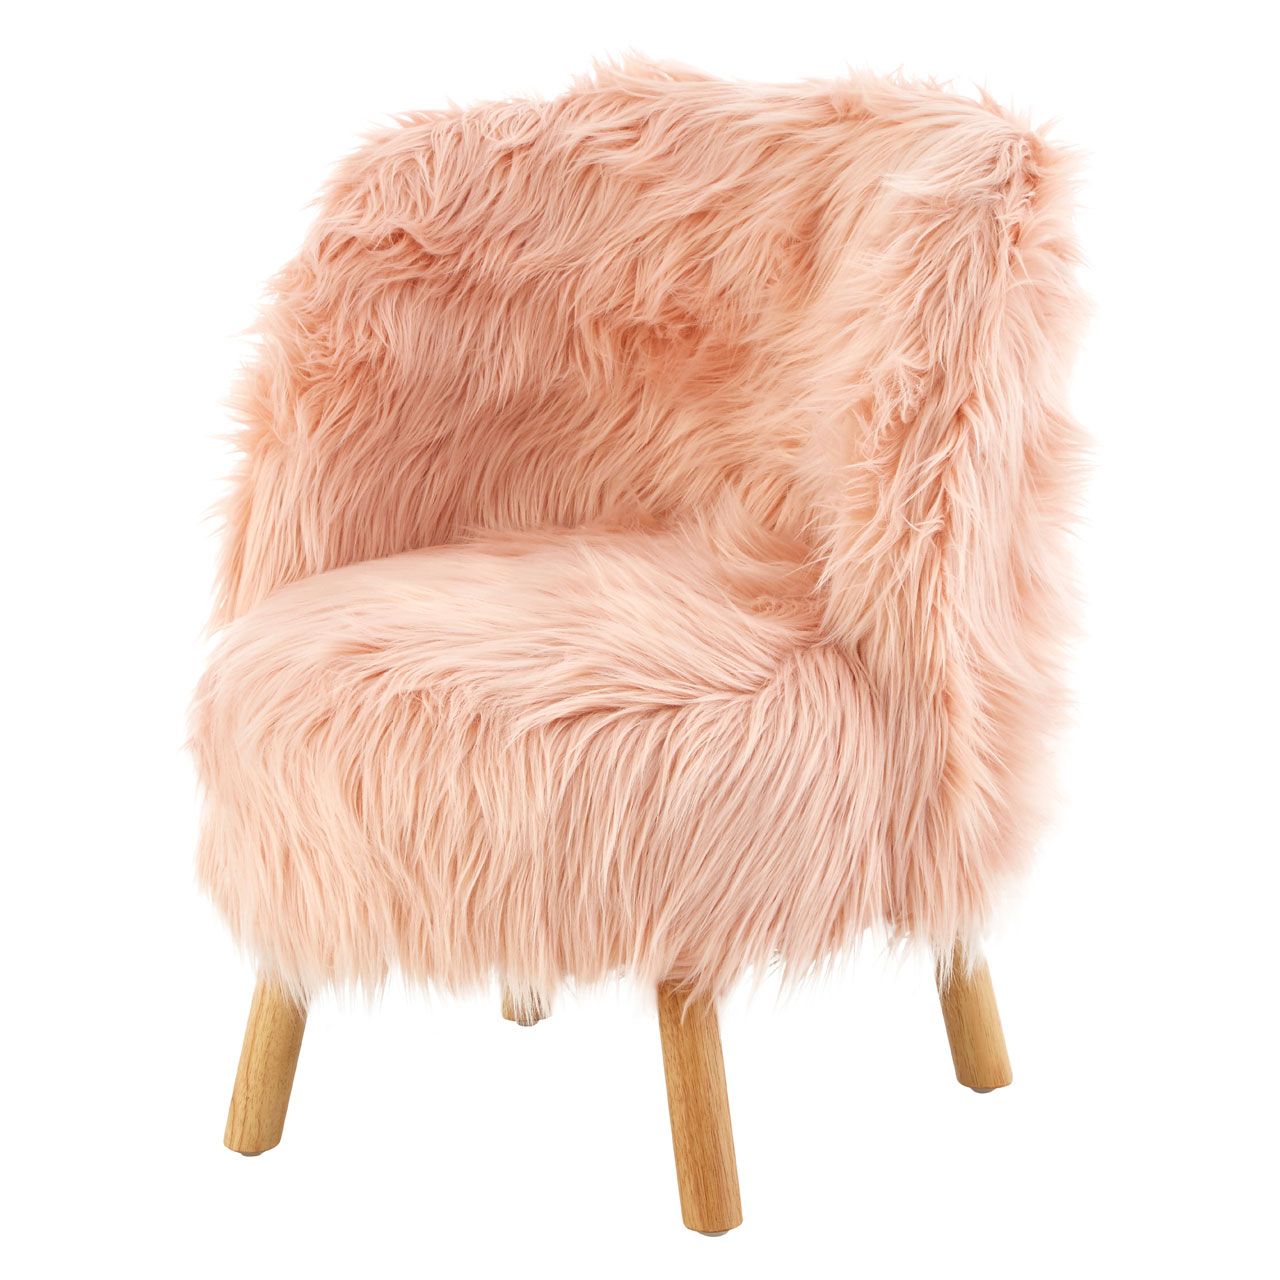 Current White Faux Fur Round Accent Stools With Storage In Kids Pink Chair Faux Fur Living Room Home Furniture Fluffy Accent (View 3 of 10)